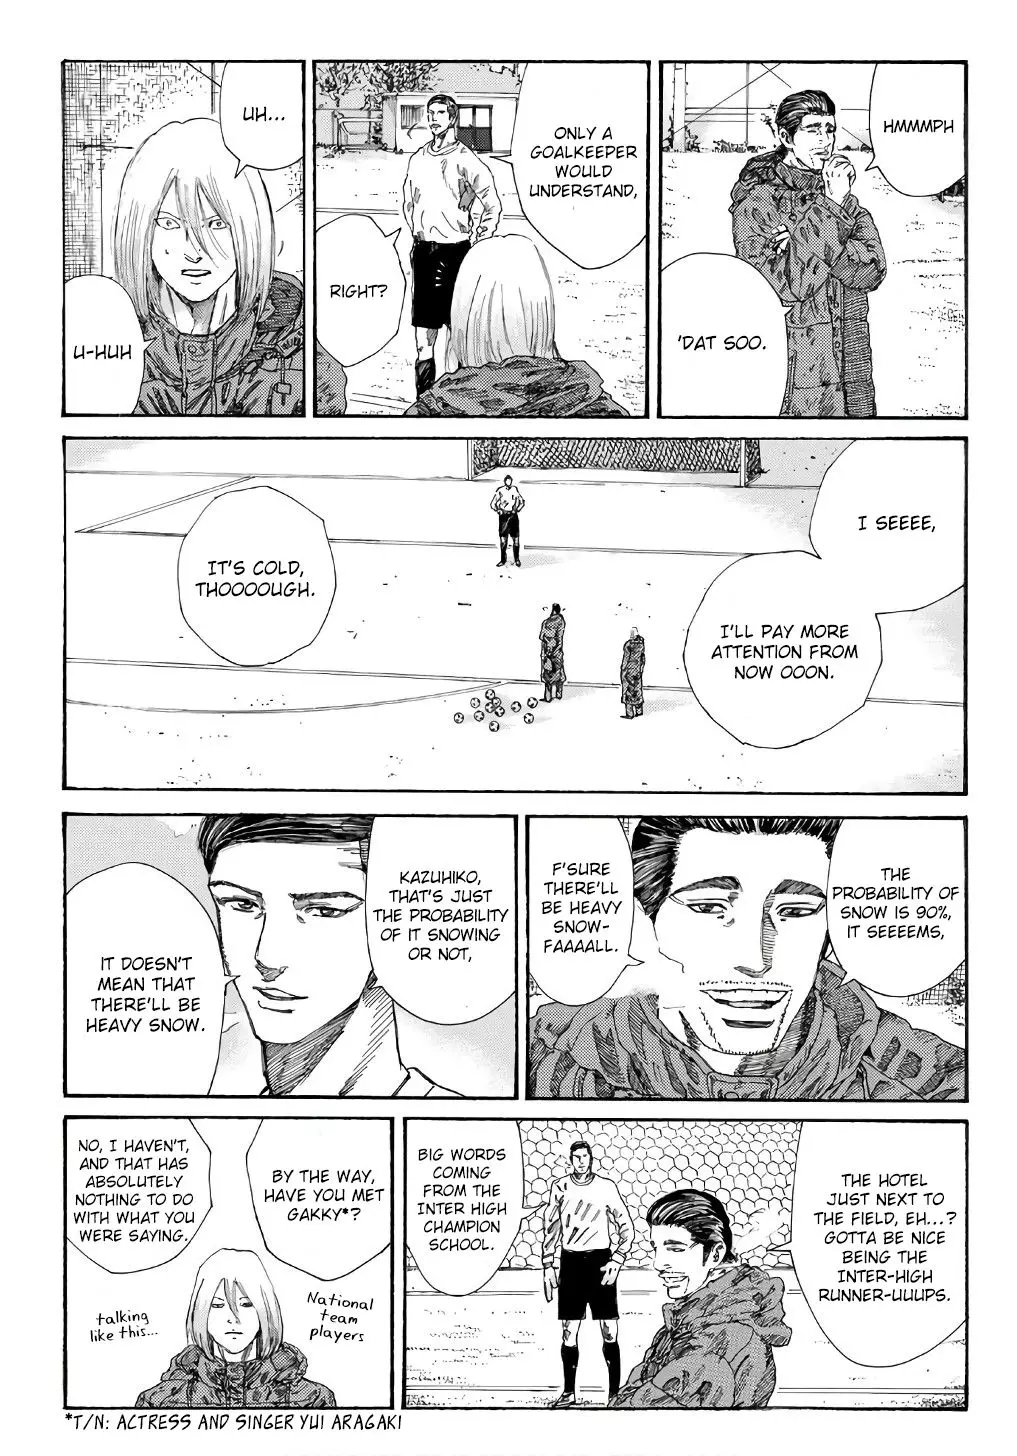 Days - 249 page 4